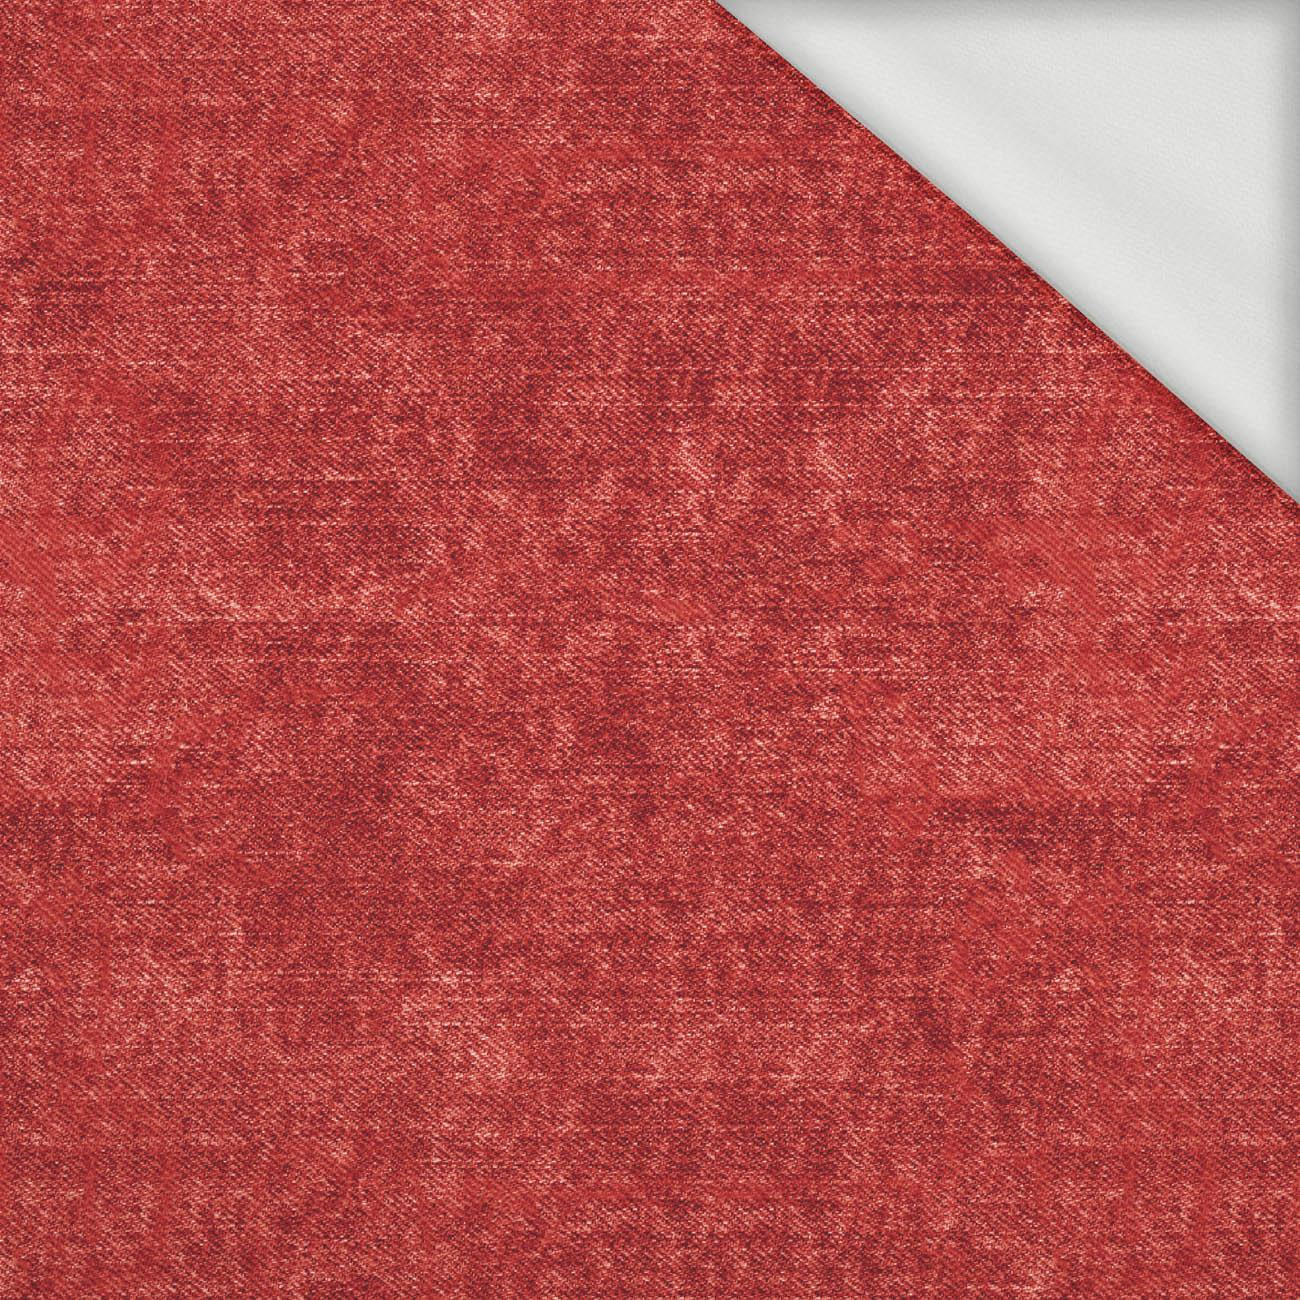 ACID WASH / RED - looped knit fabric